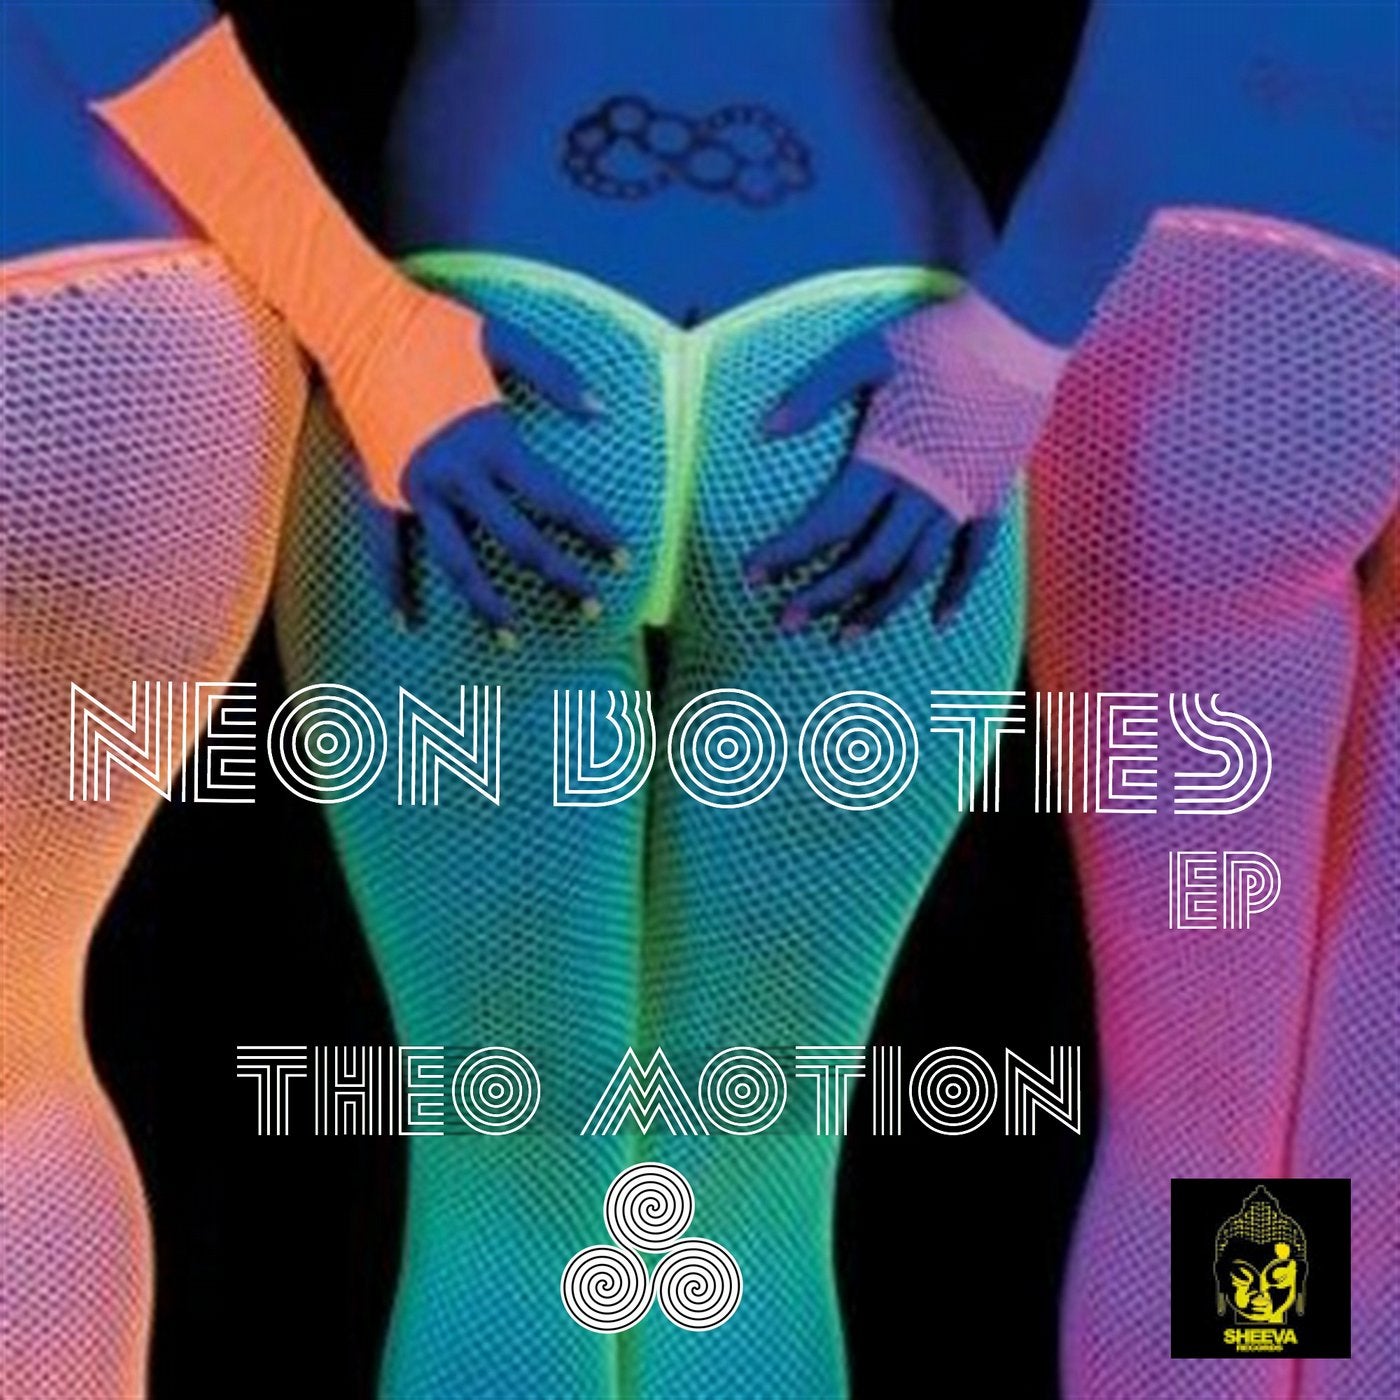 Theo Motion Neon Booties EP